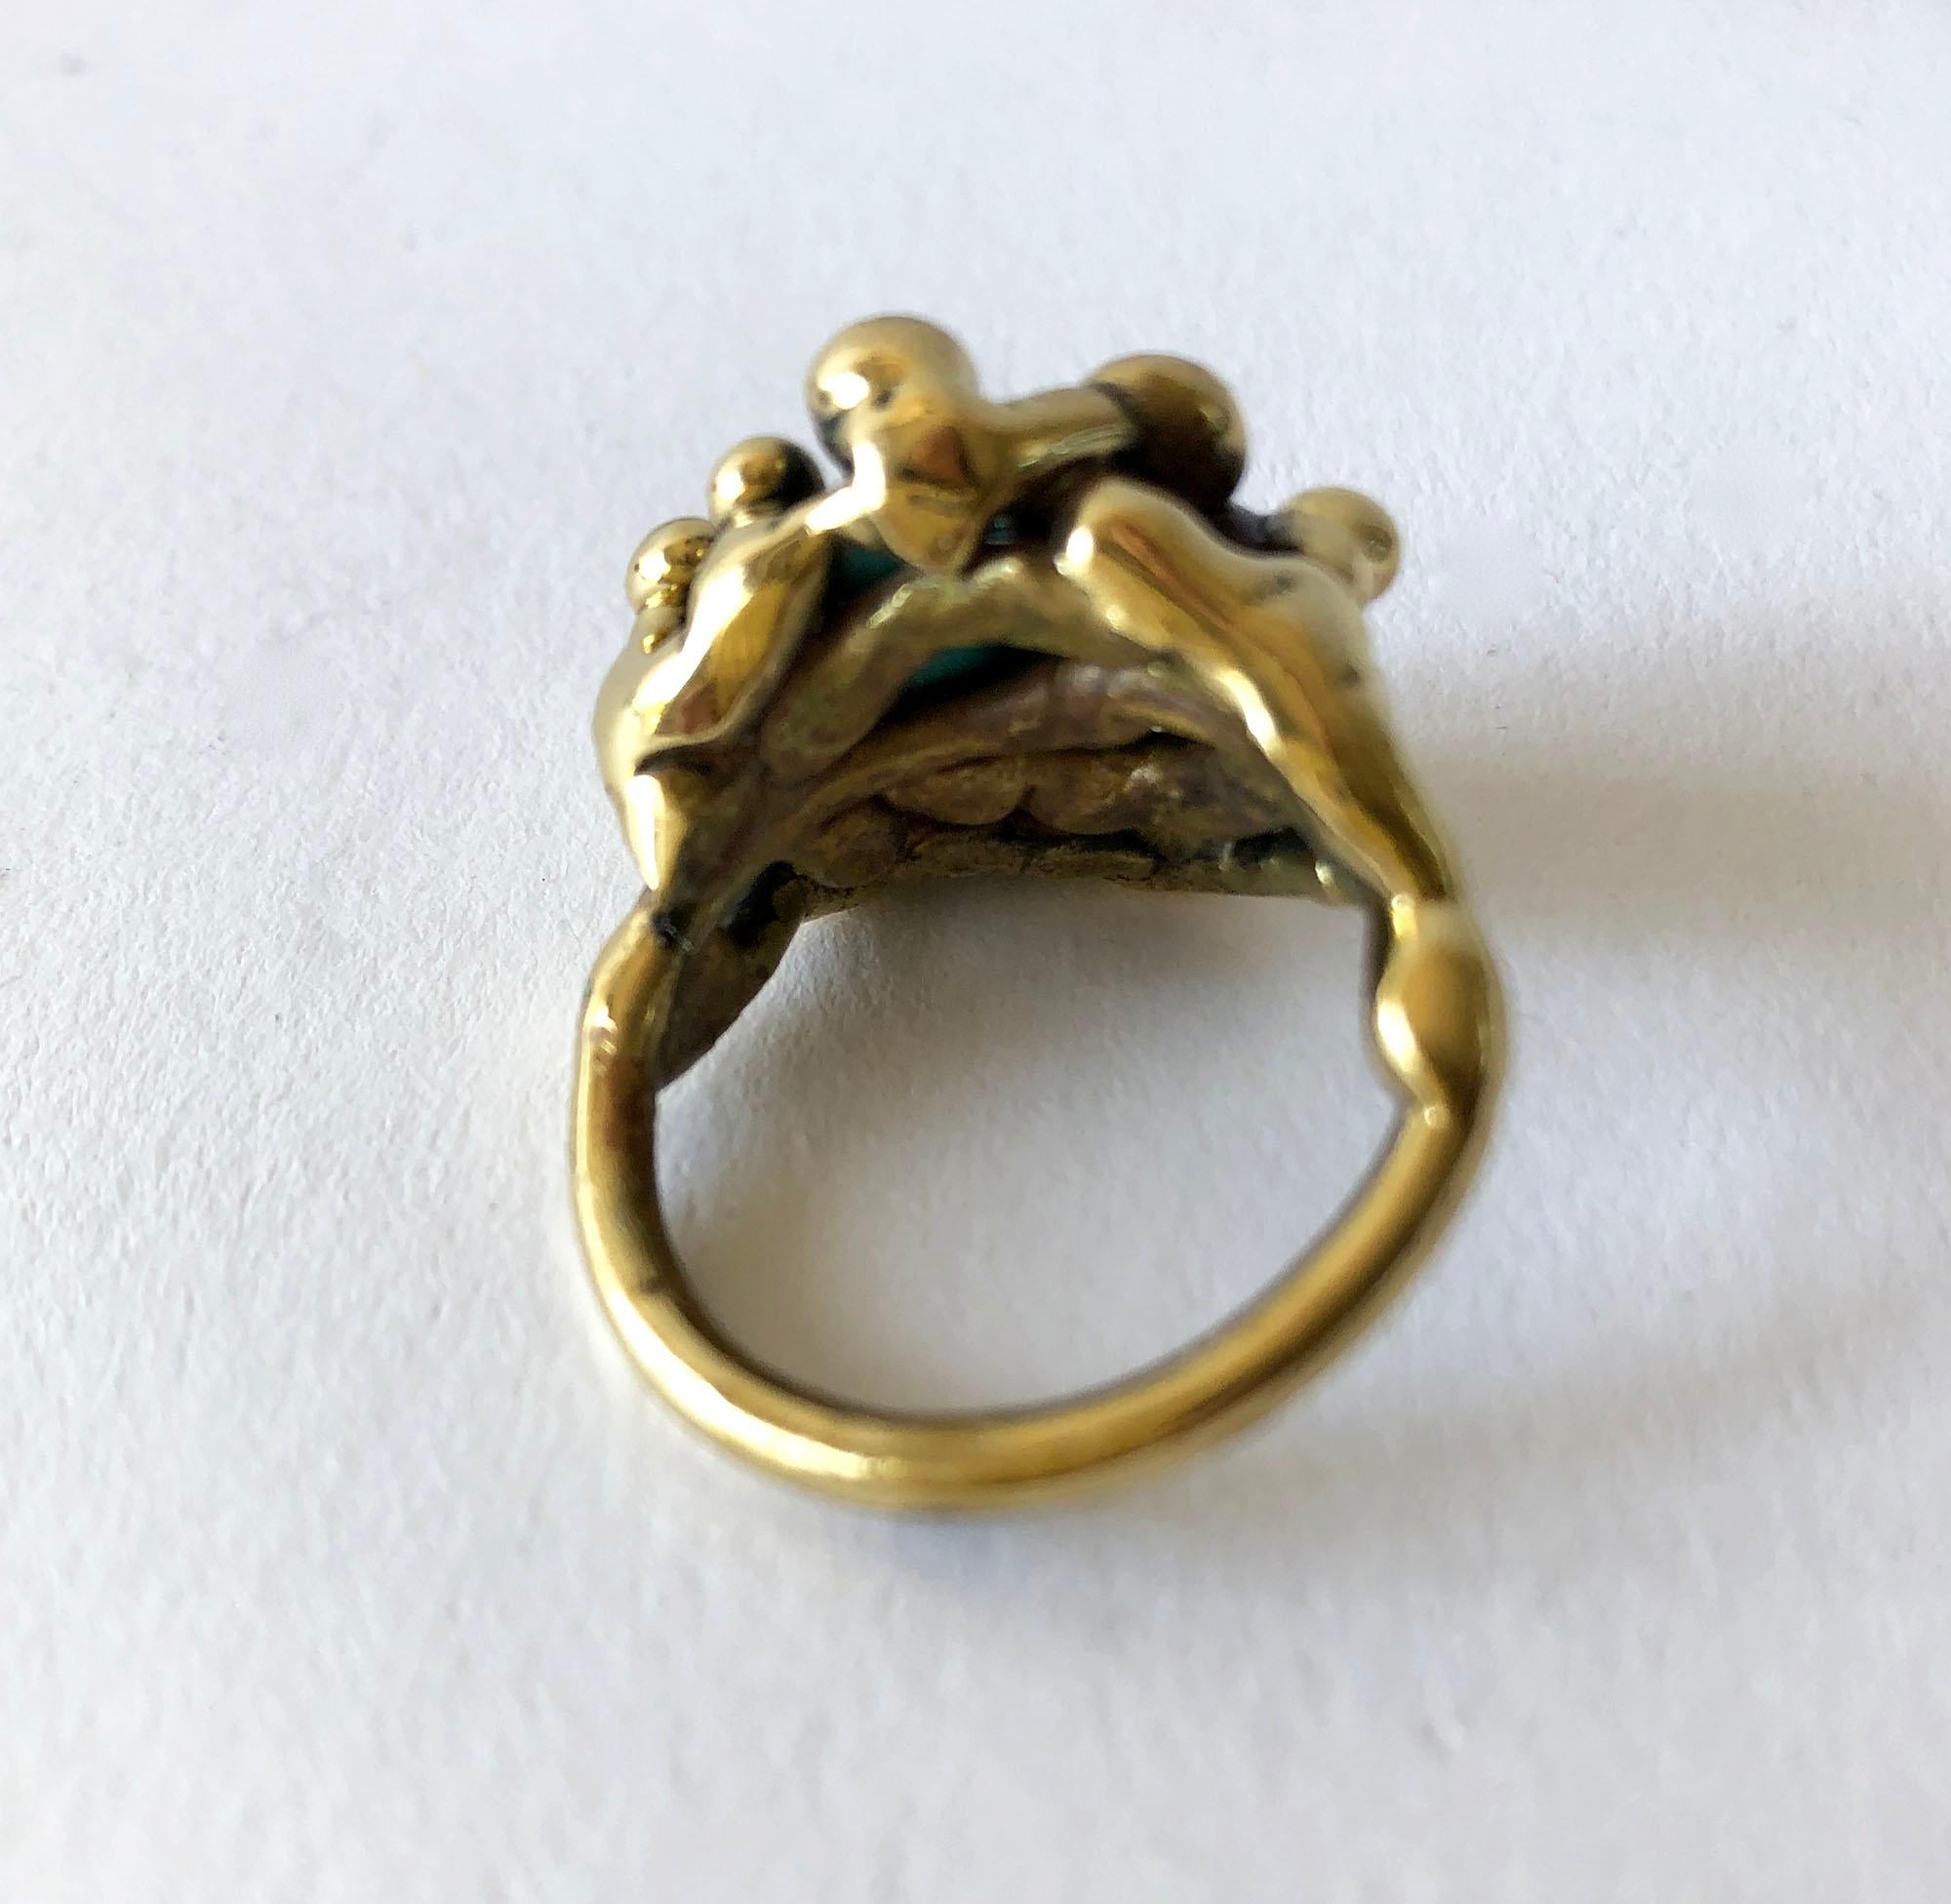 ring fused to man's finger